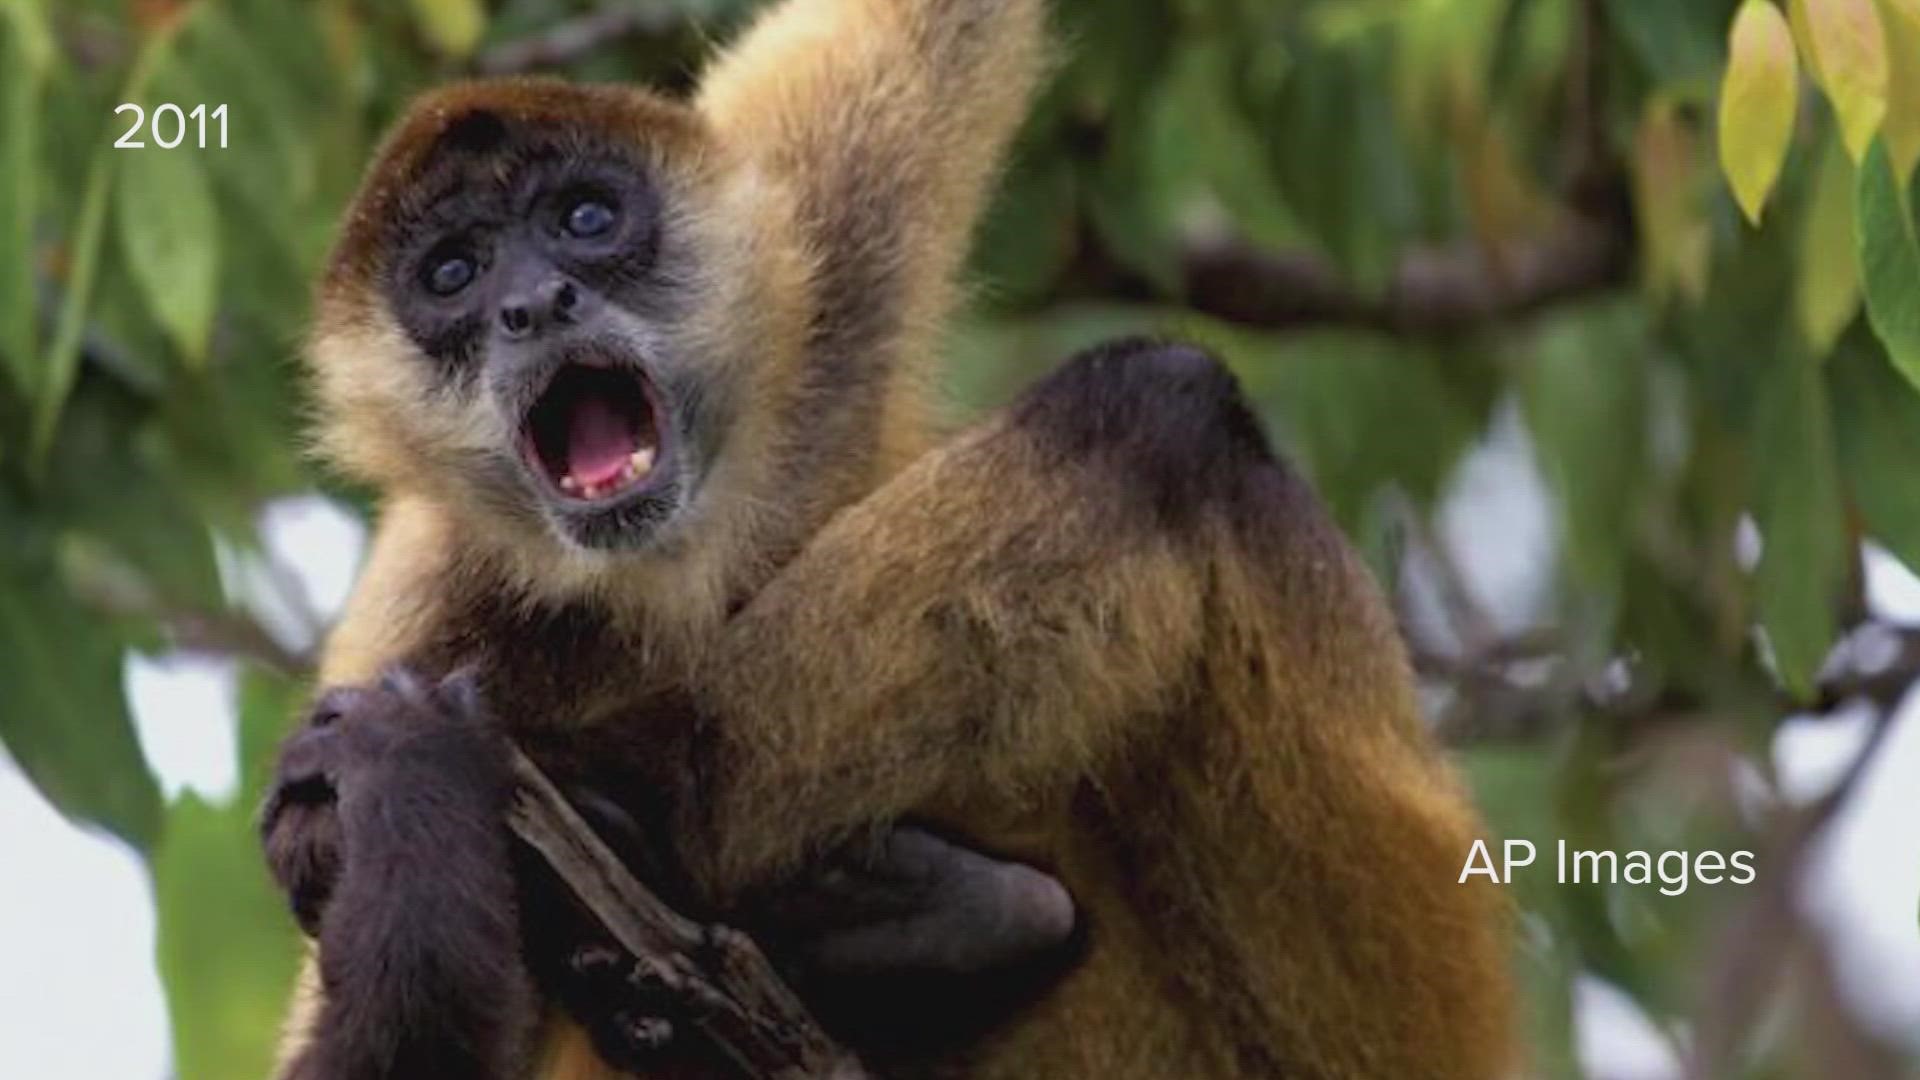 Veterinarians had to tranquilize a spider monkey at the Dallas Zoo after the primate escaped for his enclosure.